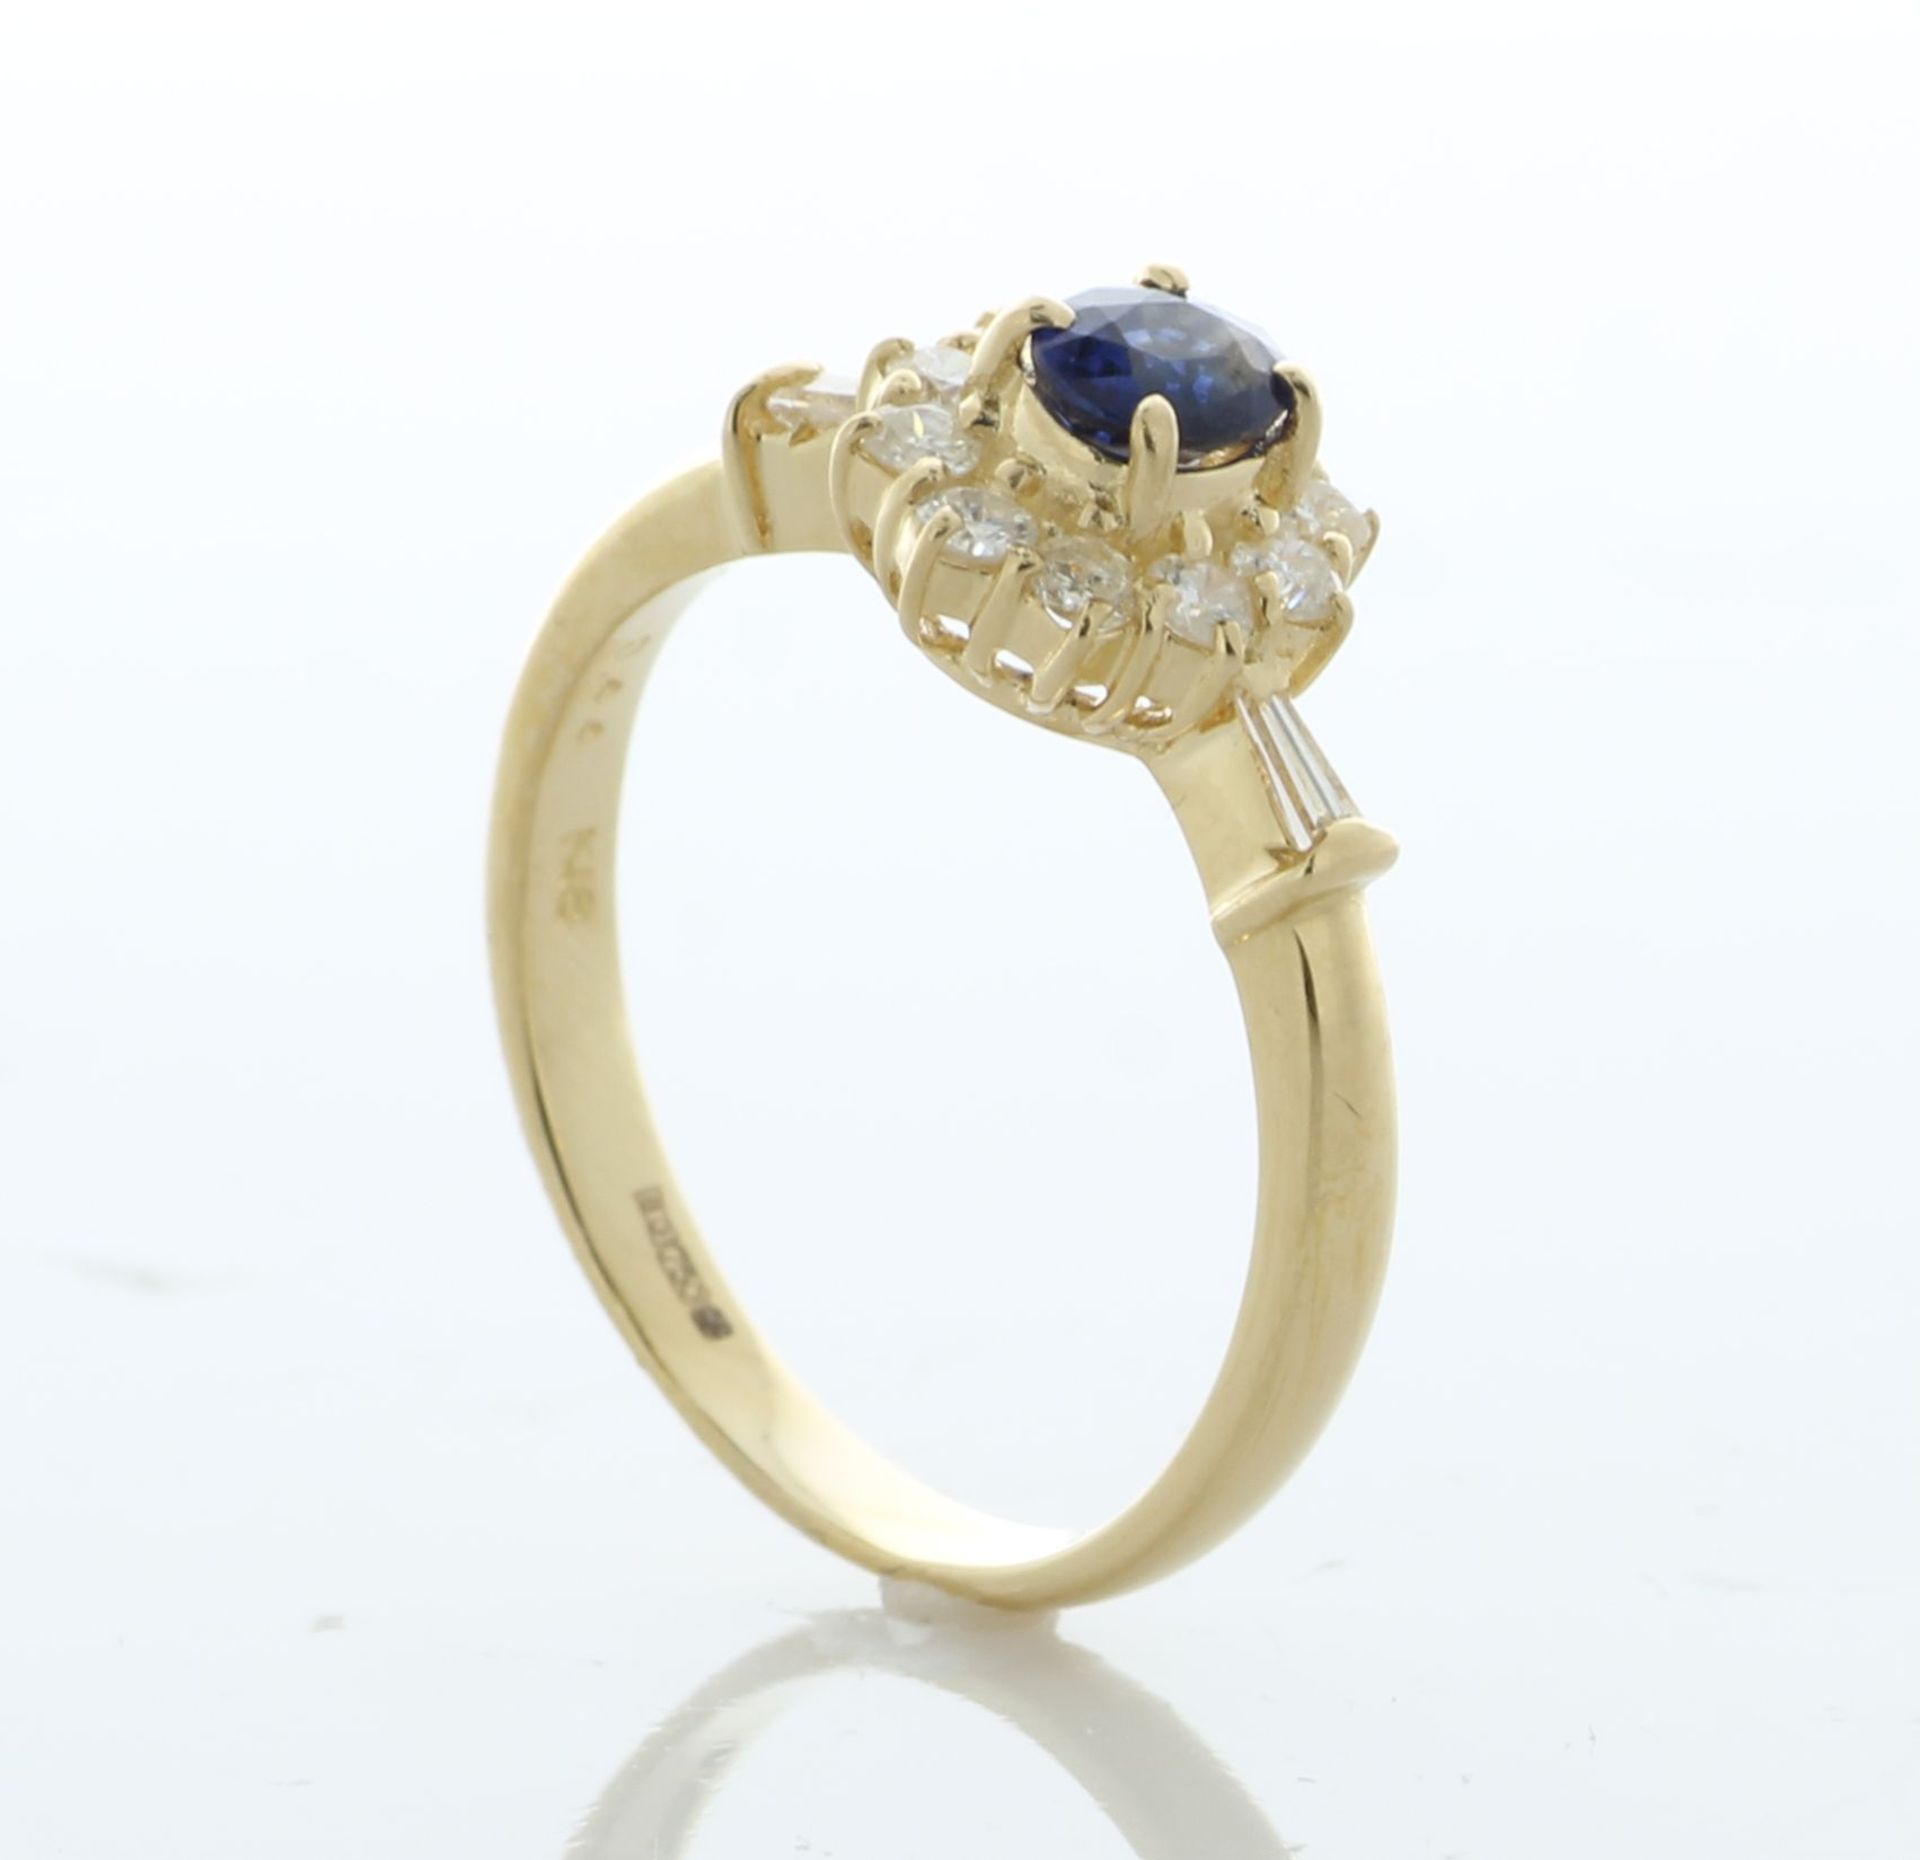 18ct Yellow Gold Oval Cut Sapphire And Diamond Ring (S0.44) 0.40 Carats - Valued By IDI £7,450.